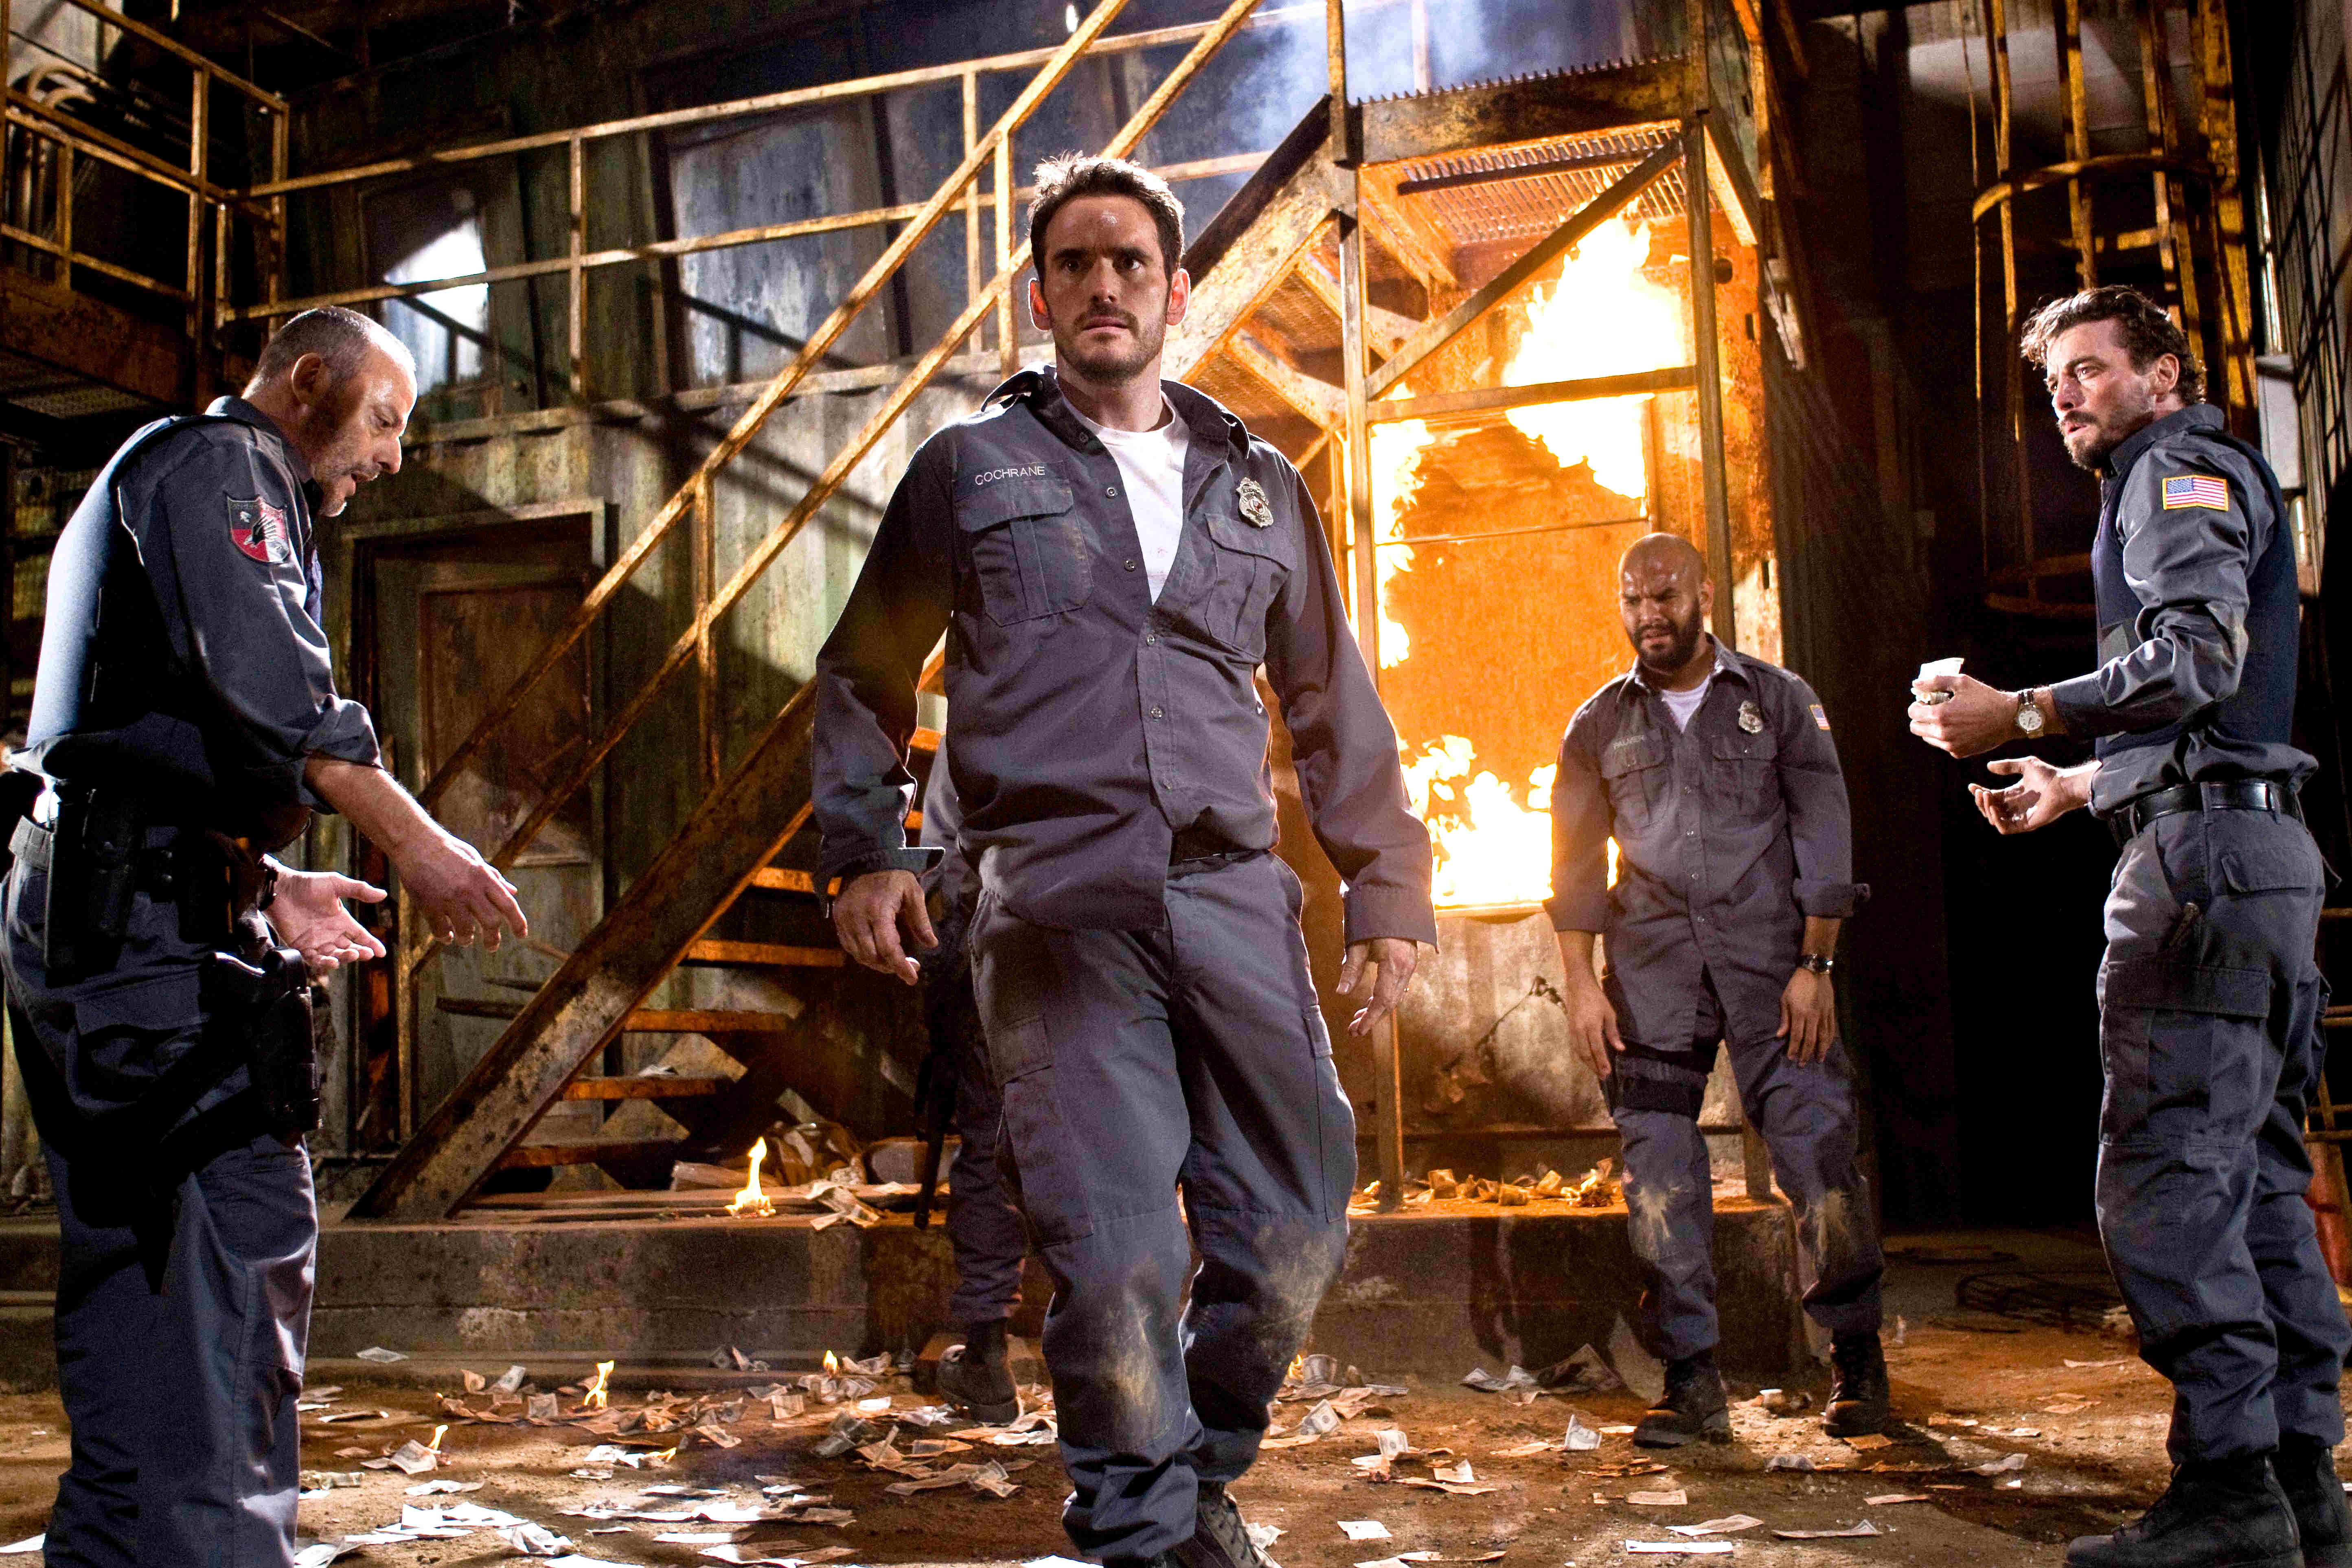 Jean Reno, Matt Dillon, Amaury Nolasco and Skeet Ulrich in Screen Gems' Armored (2009). Photo credit by Lacey Terrell.